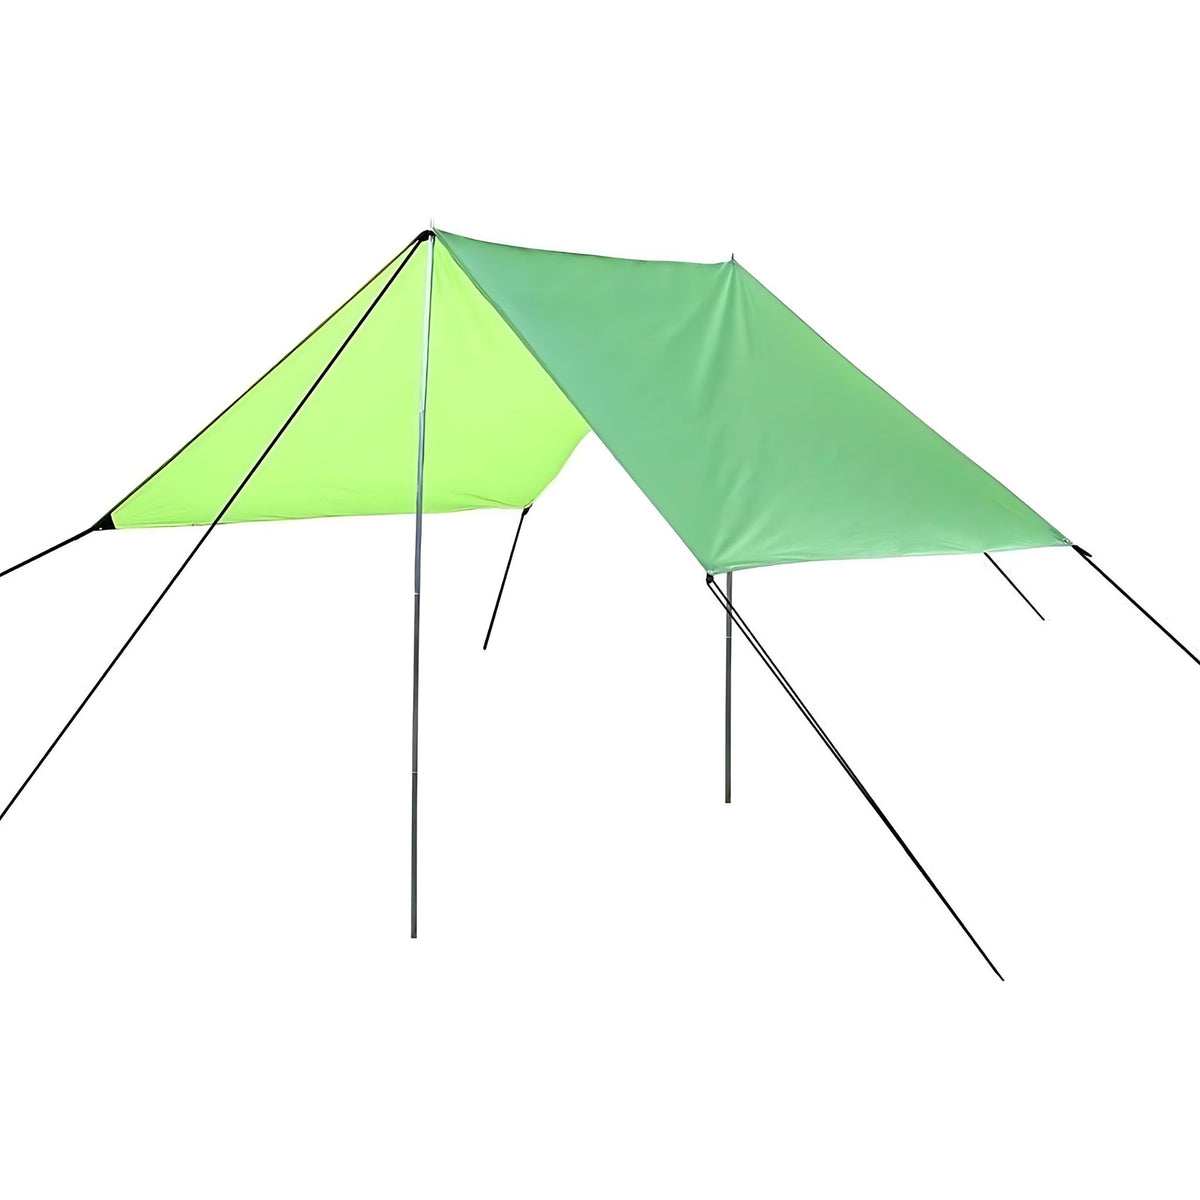 4m x 3m Green Camping Tarp Canopy Shelter with Steel Poles and Carry Case